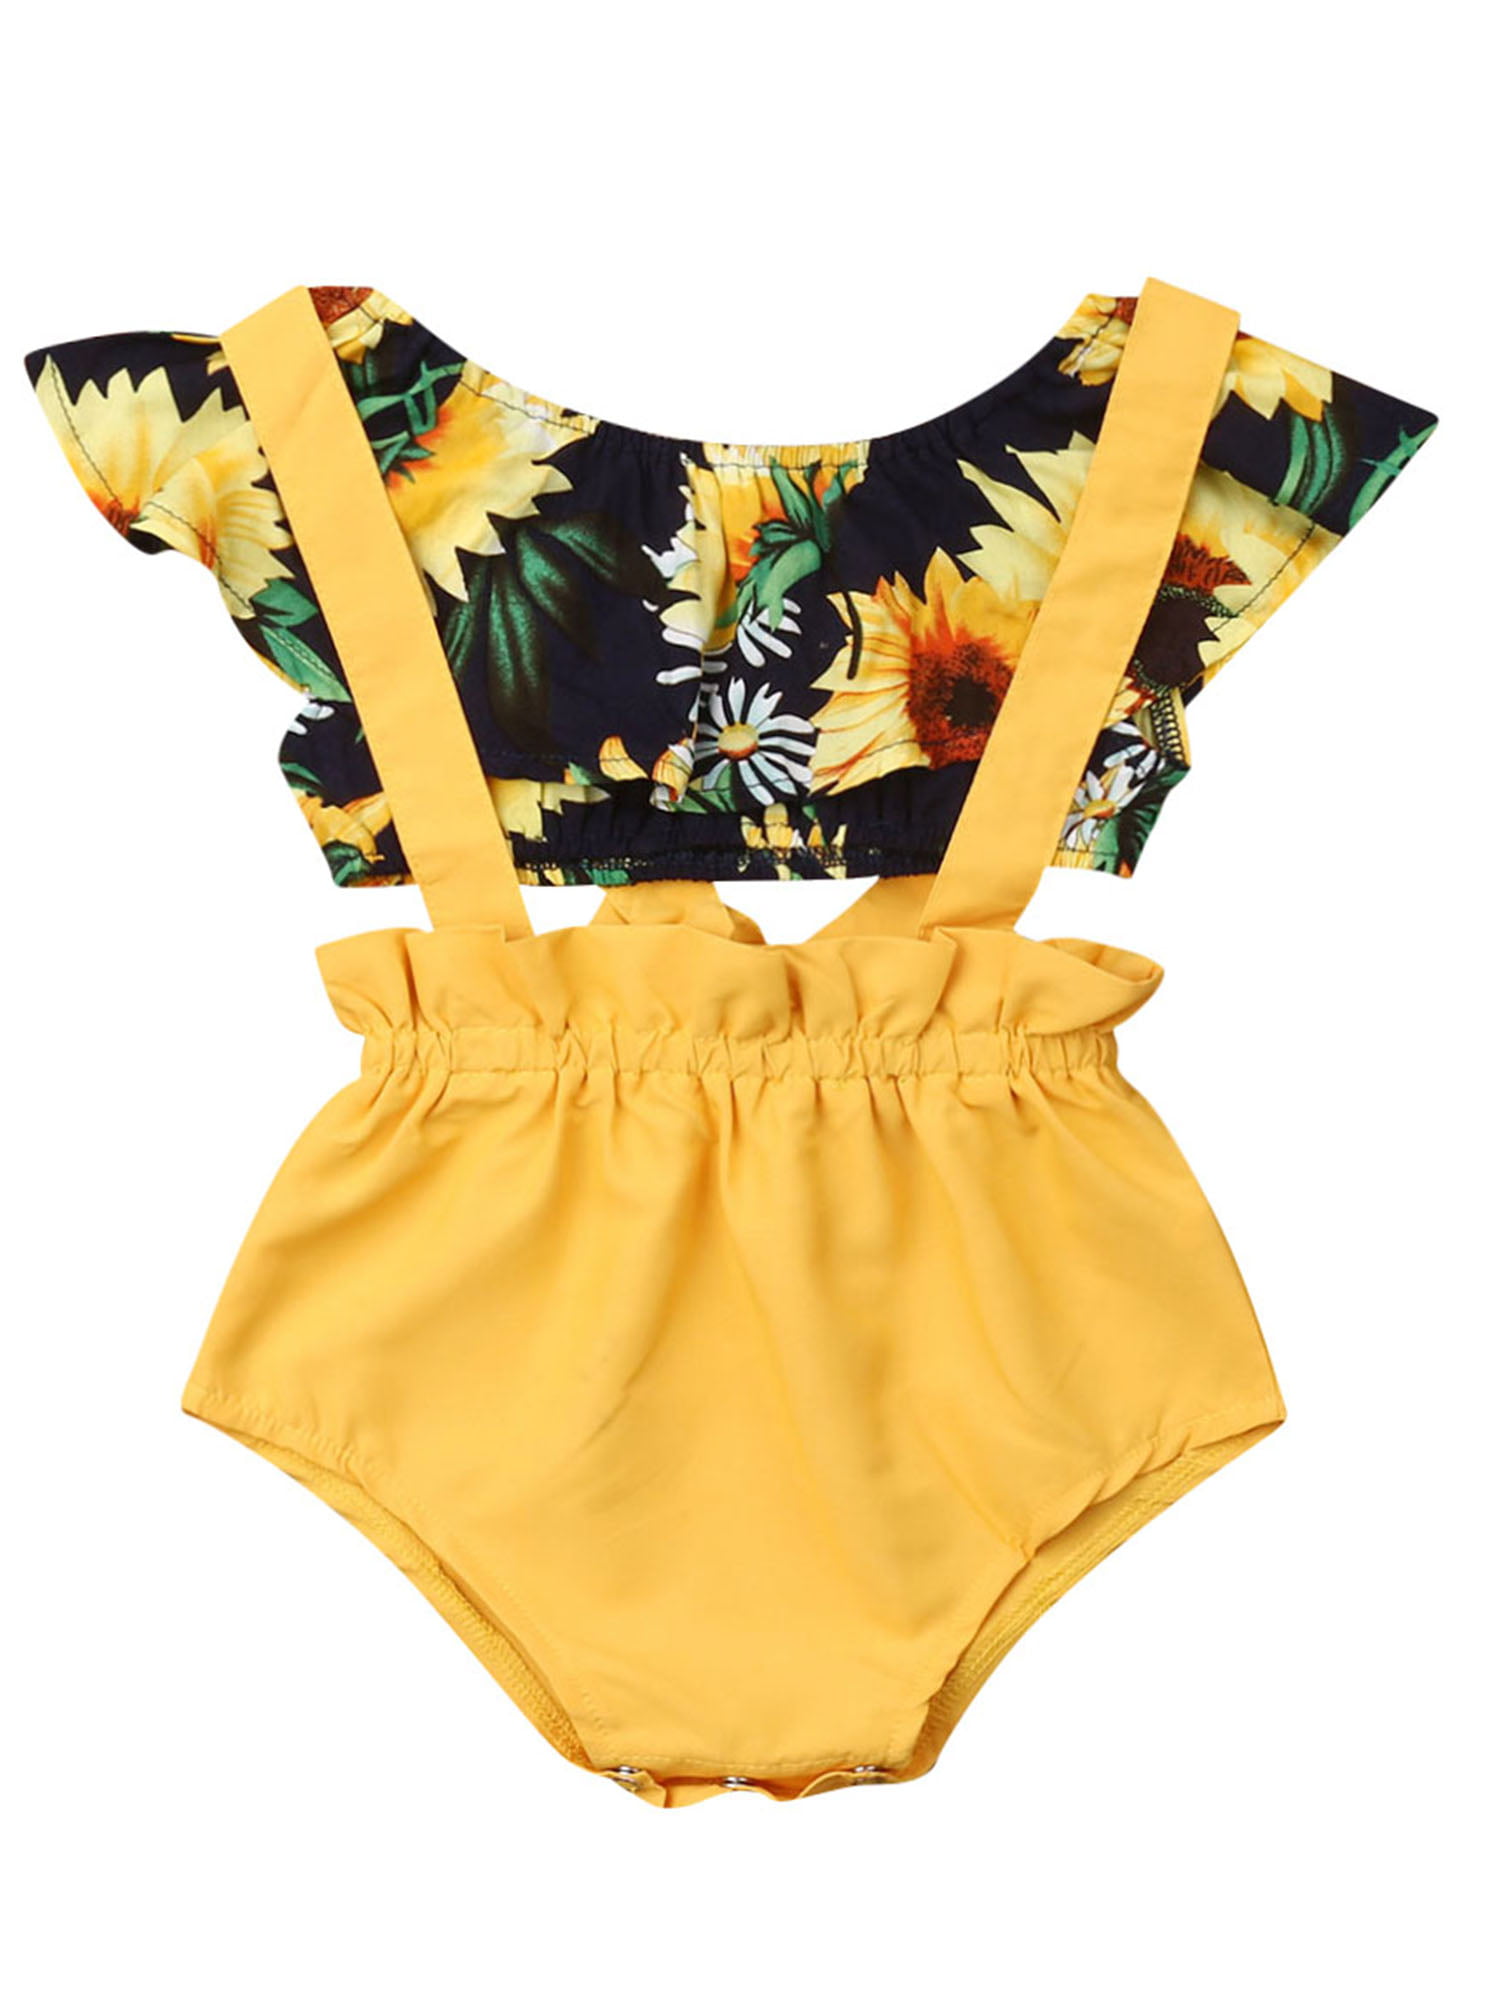 Pudcoco - Pudcoco Baby Girl Summer Sunflower Floral Crop Tops Bib Pants ...